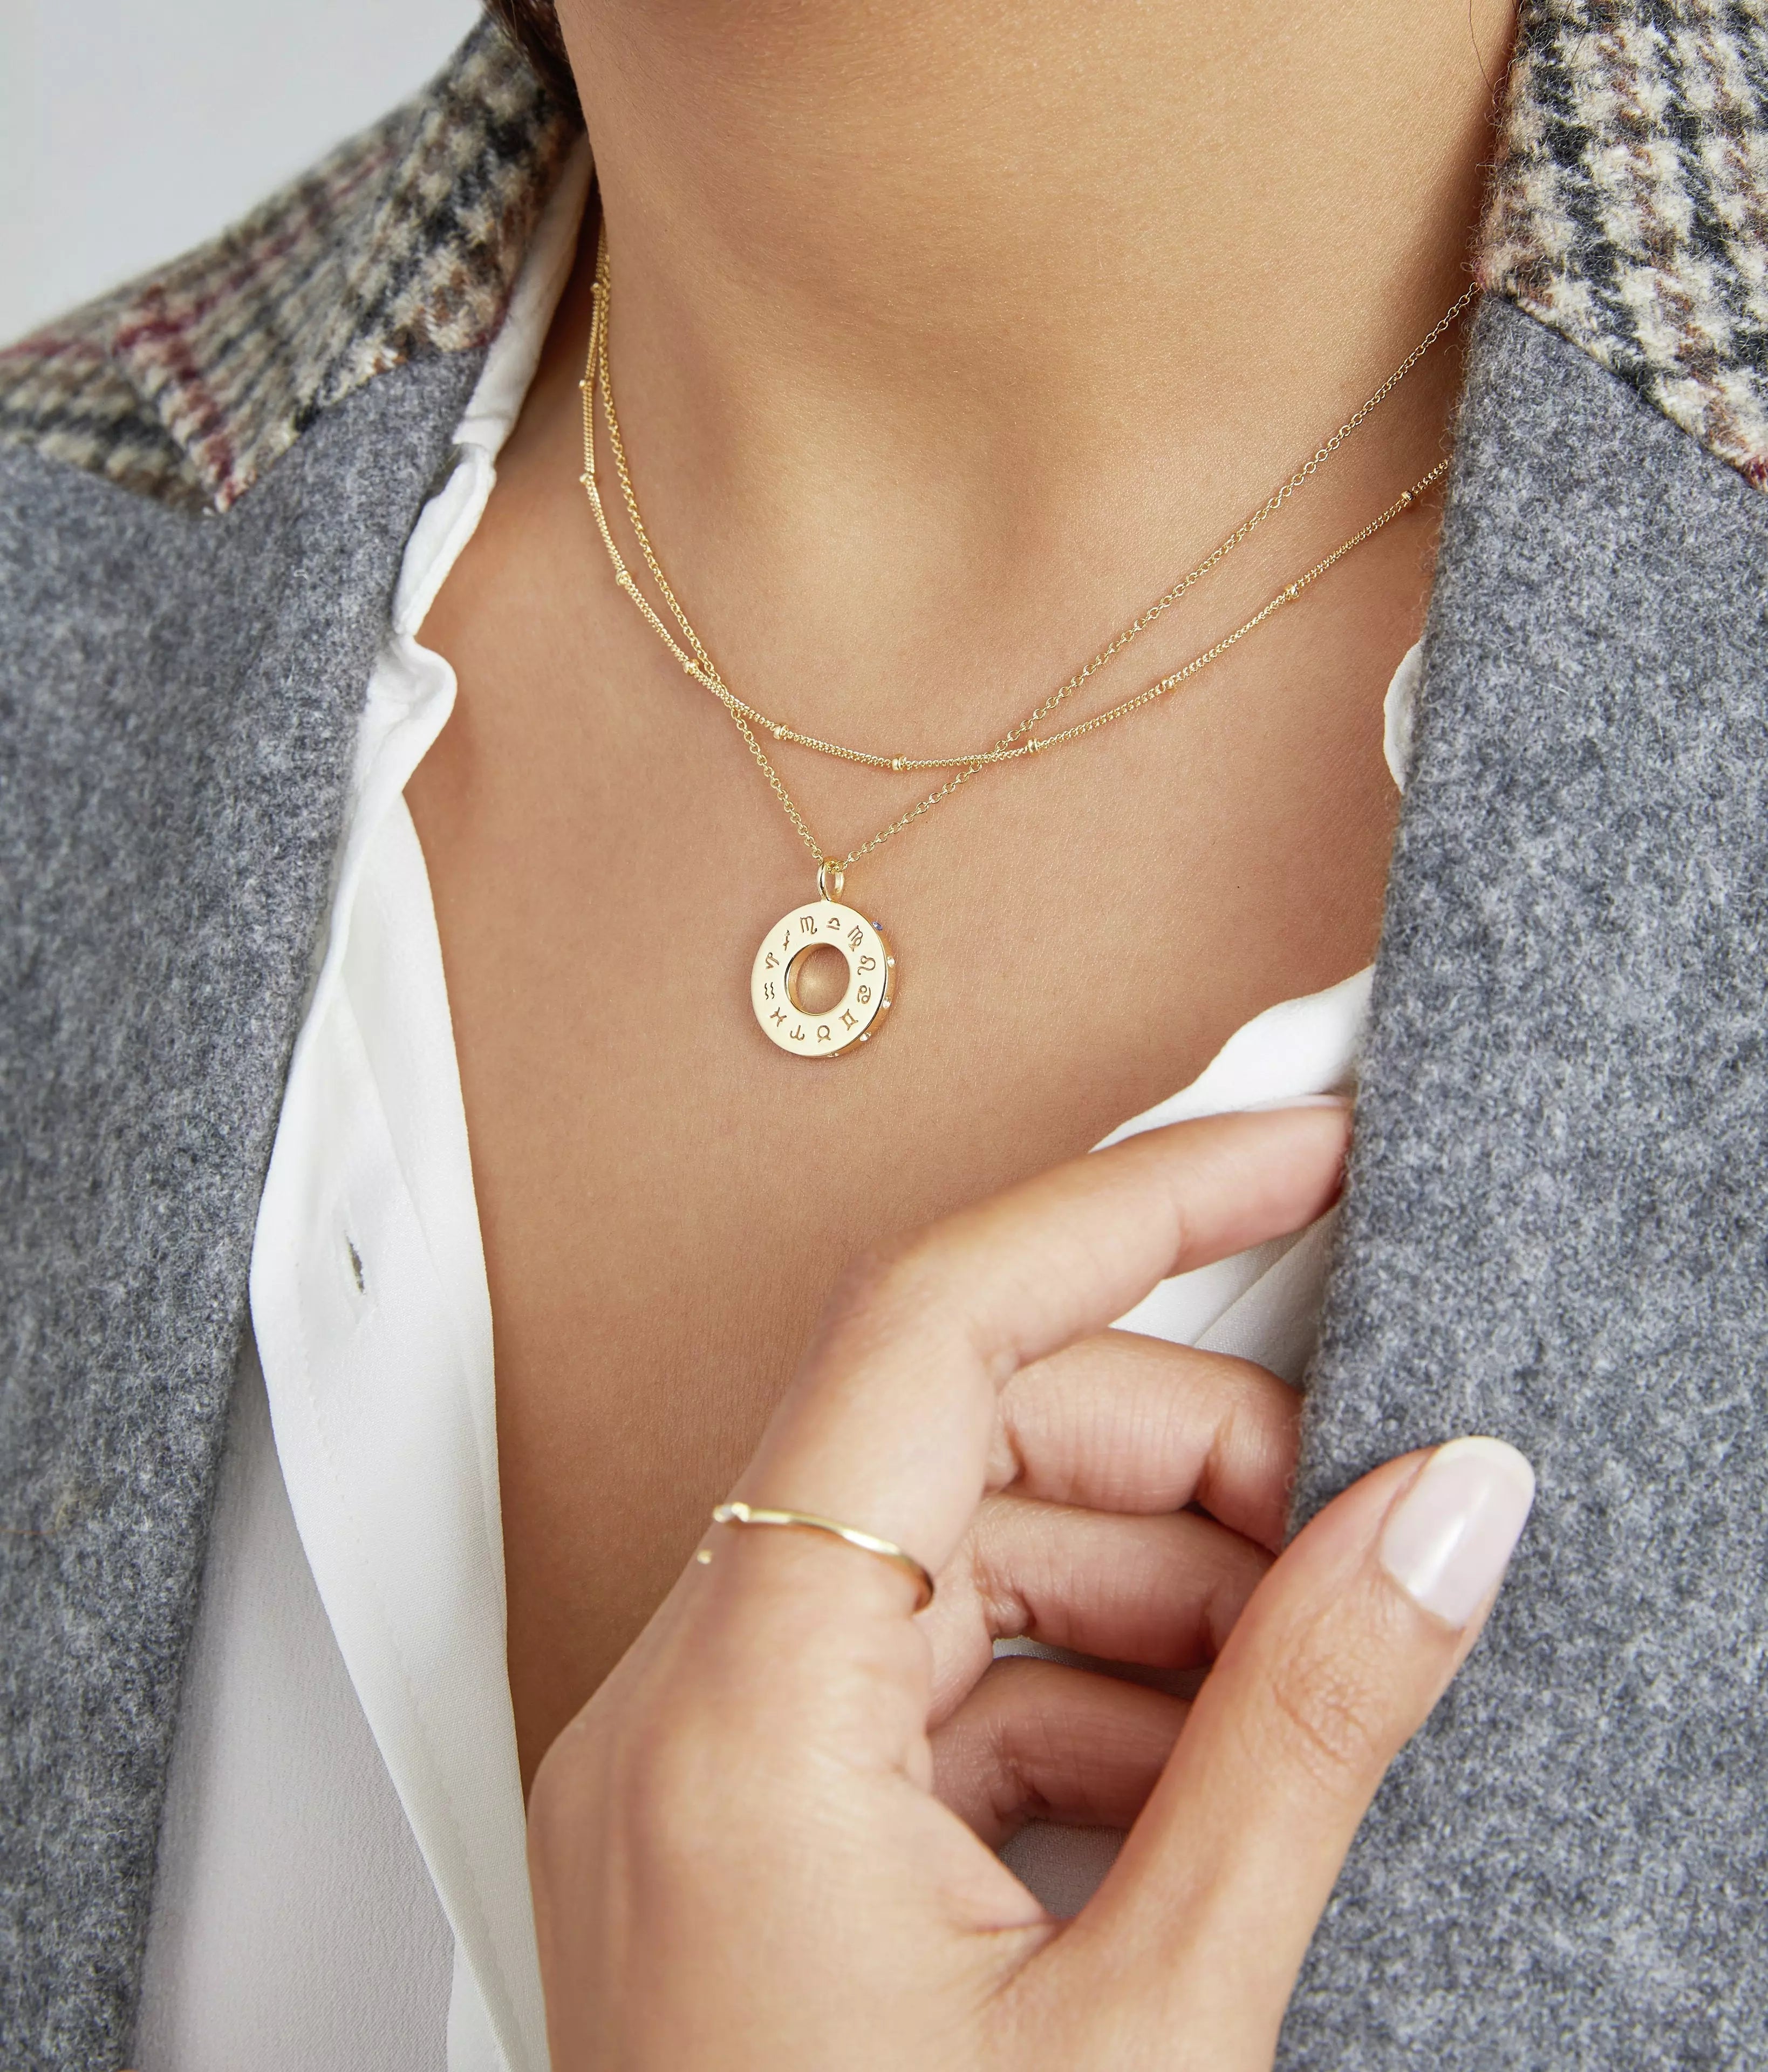 Gold zodiac birthstone necklace on a chest of a woman wearing a grey jacket